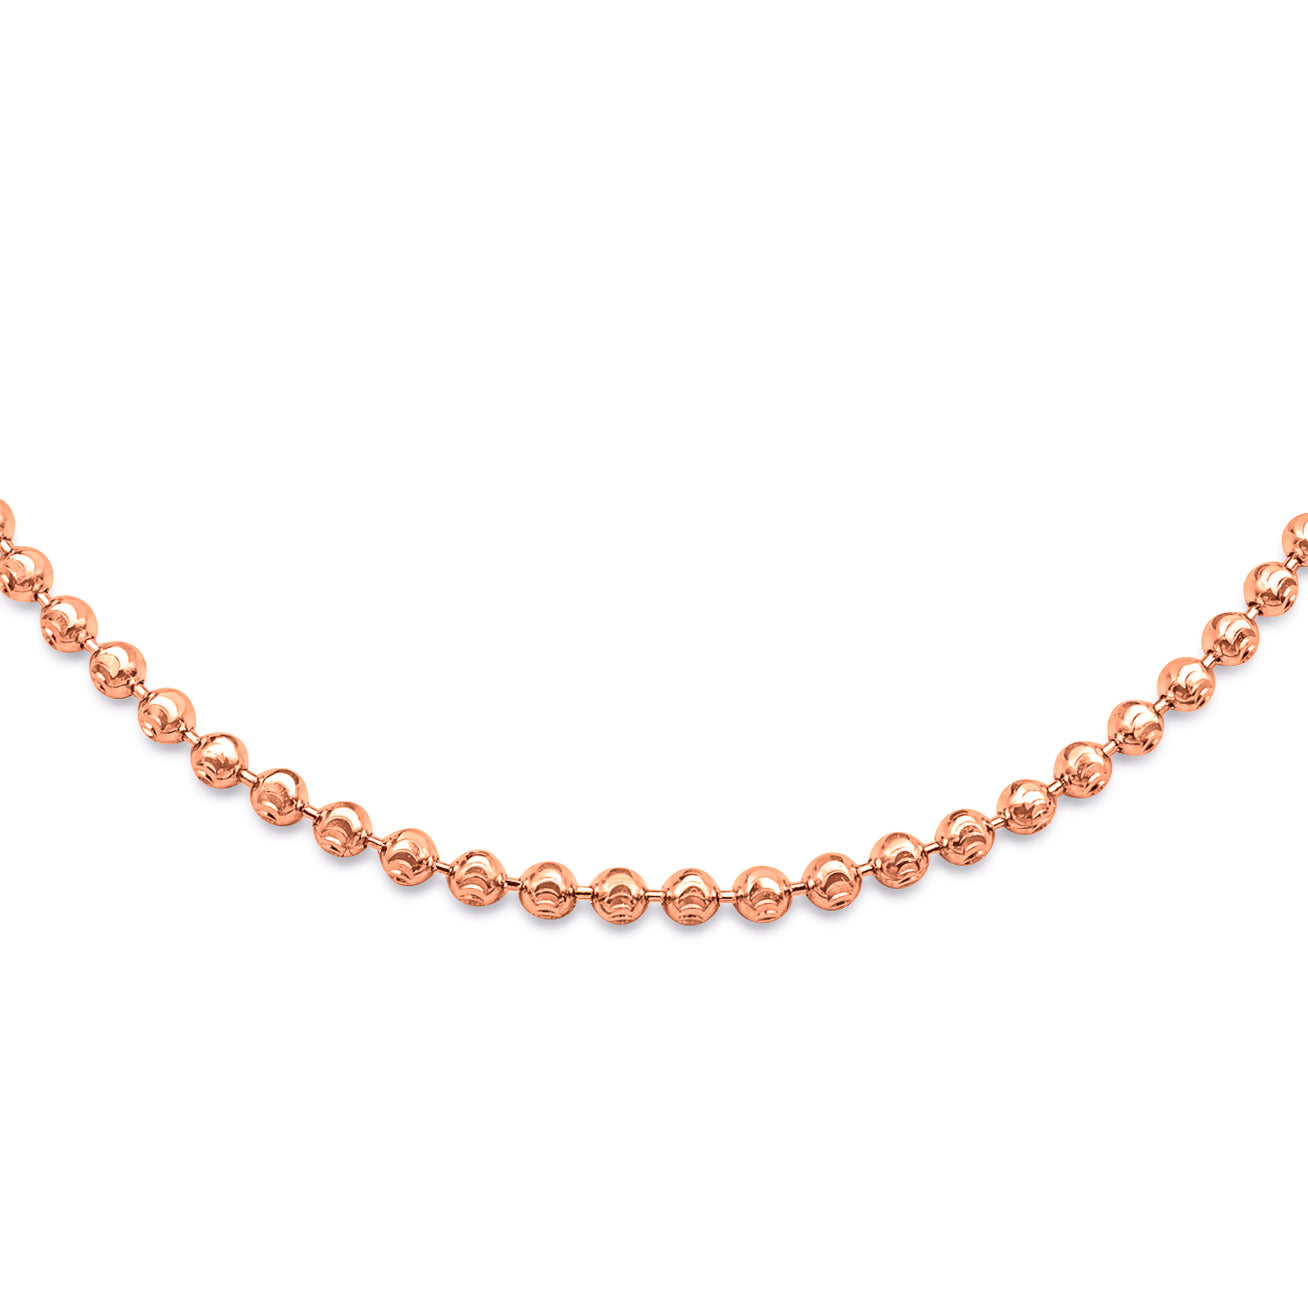 14K Solid Rose Gold Ball Bead Chain 2mm 26 Inches - 9.10 Grams (Long) / Rose Gold - NYC Luxury